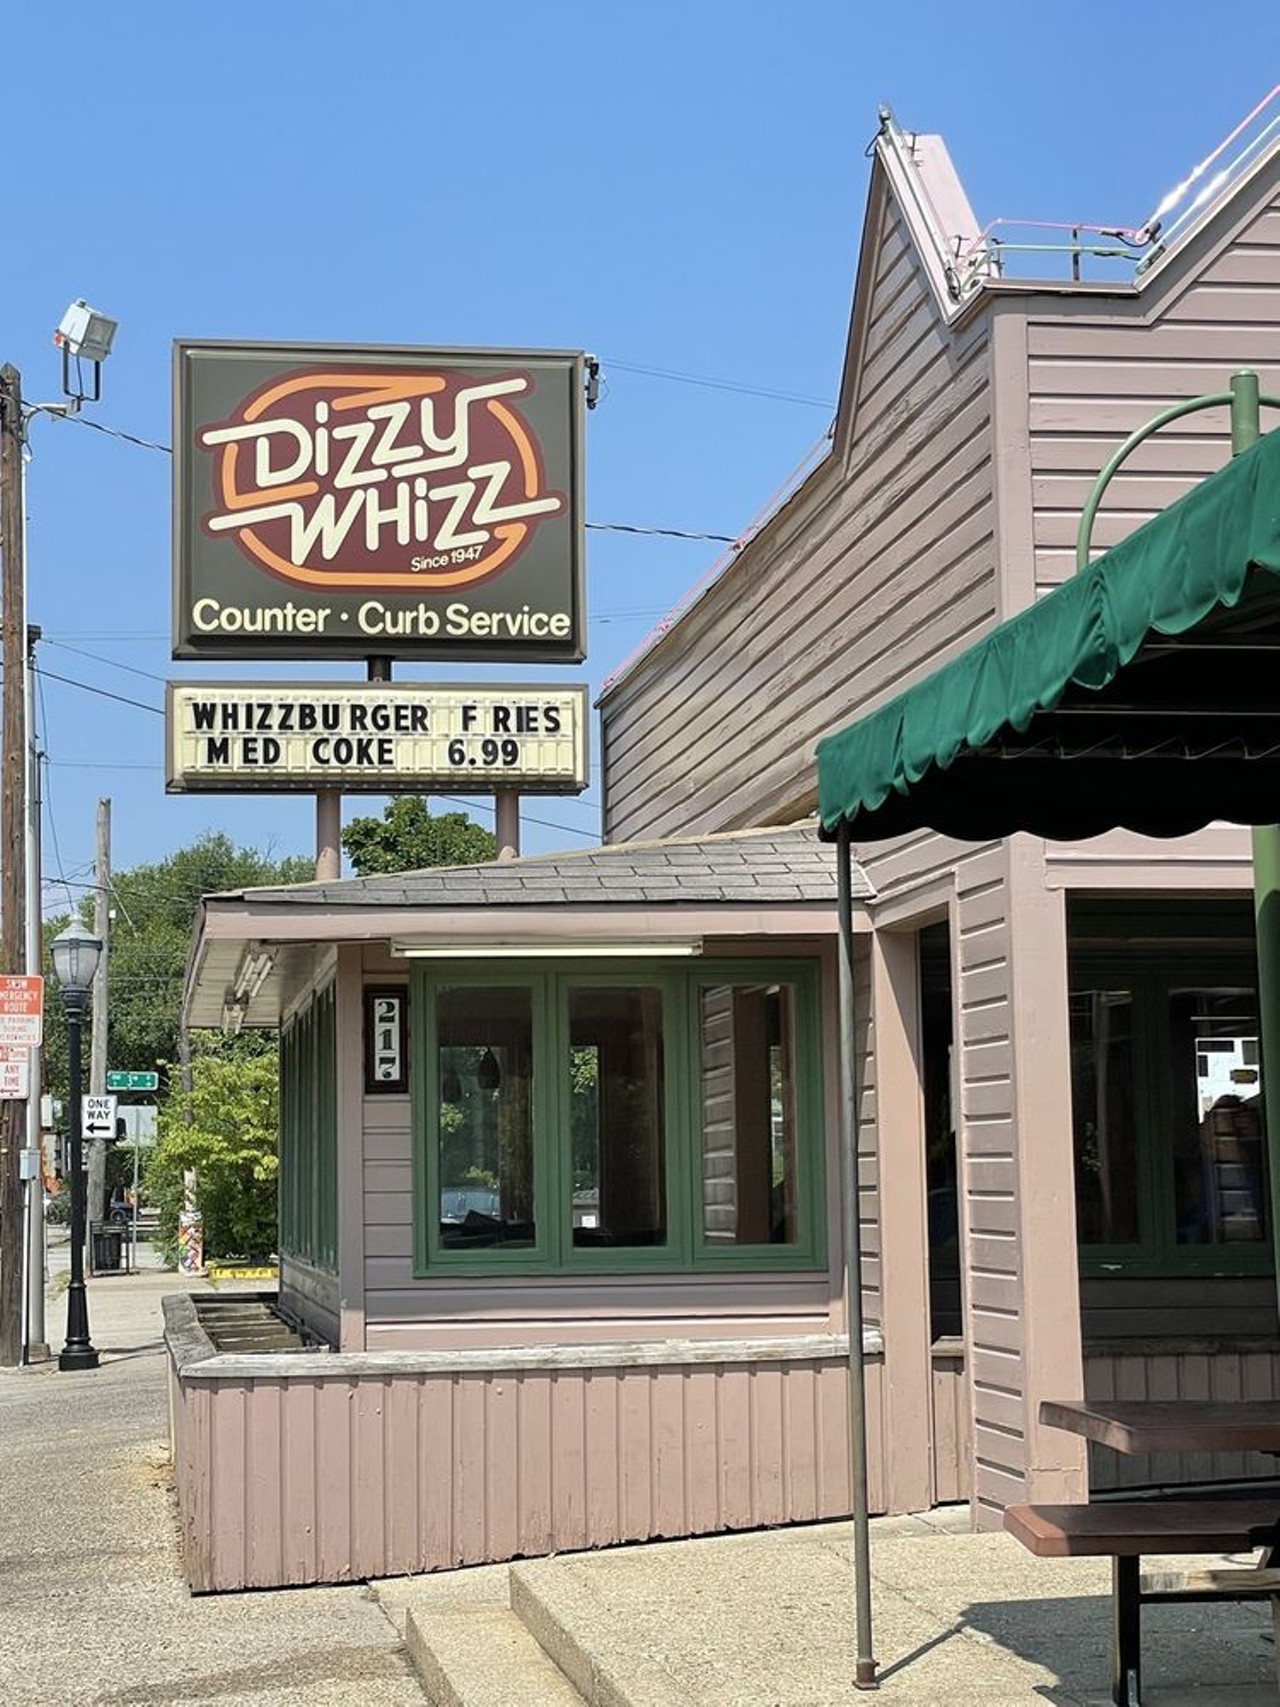 Dizzy Whizz
217 West Saint Catherine St 
Dizzy Whizz, home to the Whizzburger, has been in Louisville for more than 70 years. With both indoor and curbside seating, the diner has breakfast, burgers, sandwiches, and event a dairy bar with plenty of sweets to pick. Photo via  JT C. from Yelp 